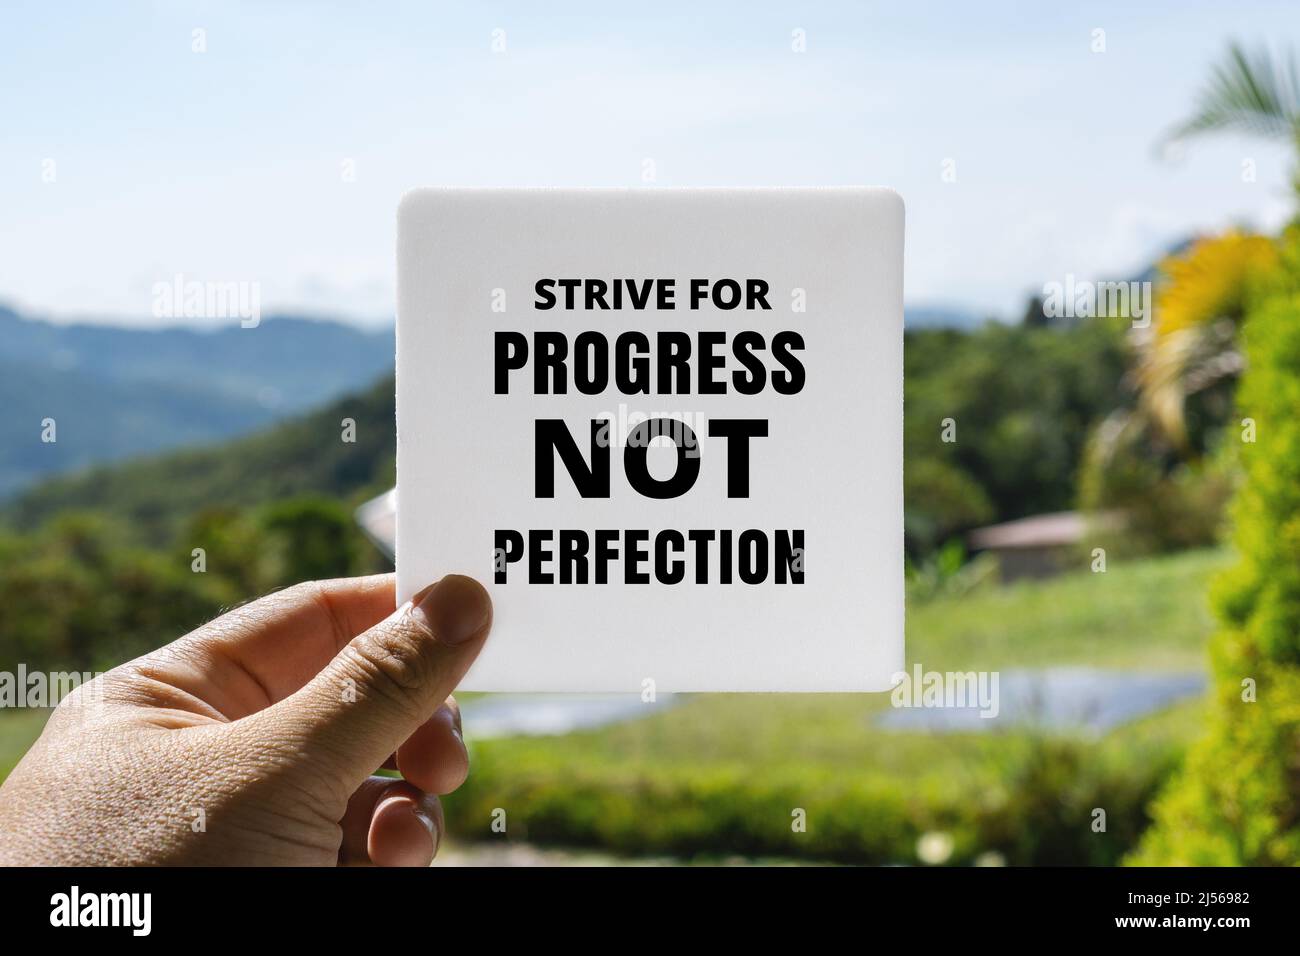 Hand Holding White Paper Card Against Fresh Nature Background. Inspirational Quote. Strive For Progress Not Perfection. Stock Photo